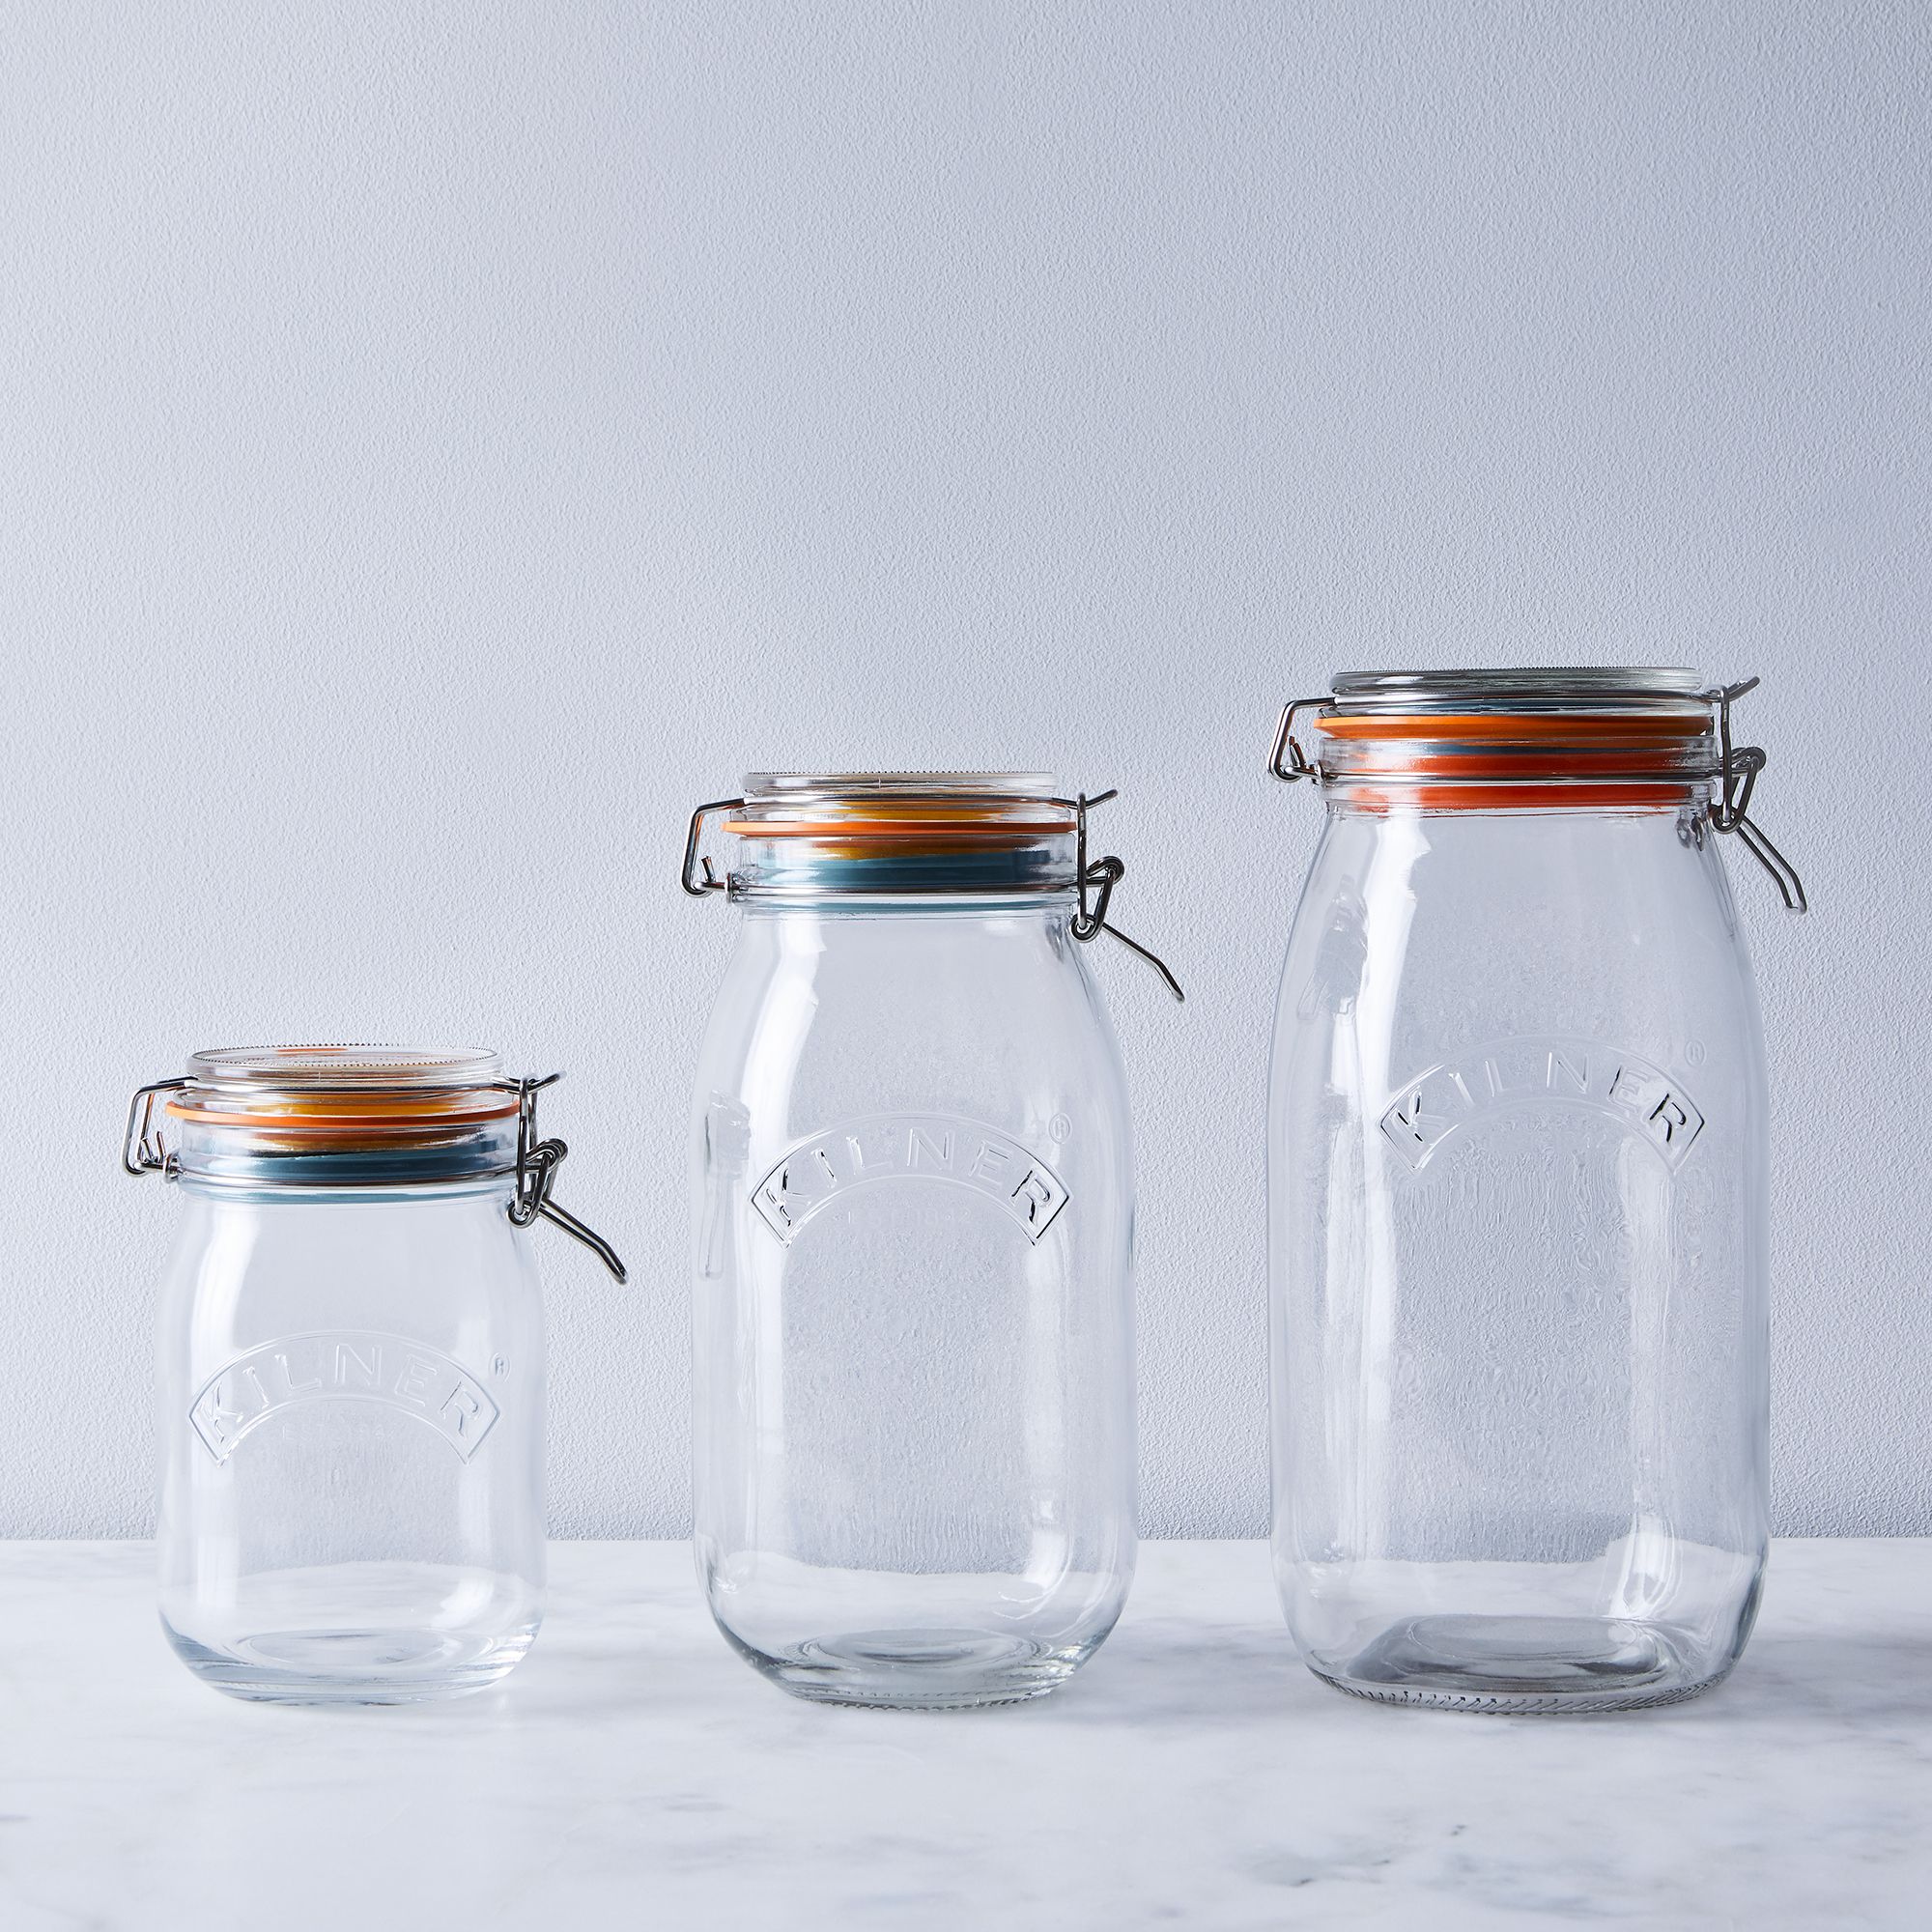 b4e1b1bd-a840-4cb7-b8bc-2ca7224c7ae9–2018-0205_typhoon_kilner-measure-and-store-jars-set-of-3_silo_rocky-luten_007_1-